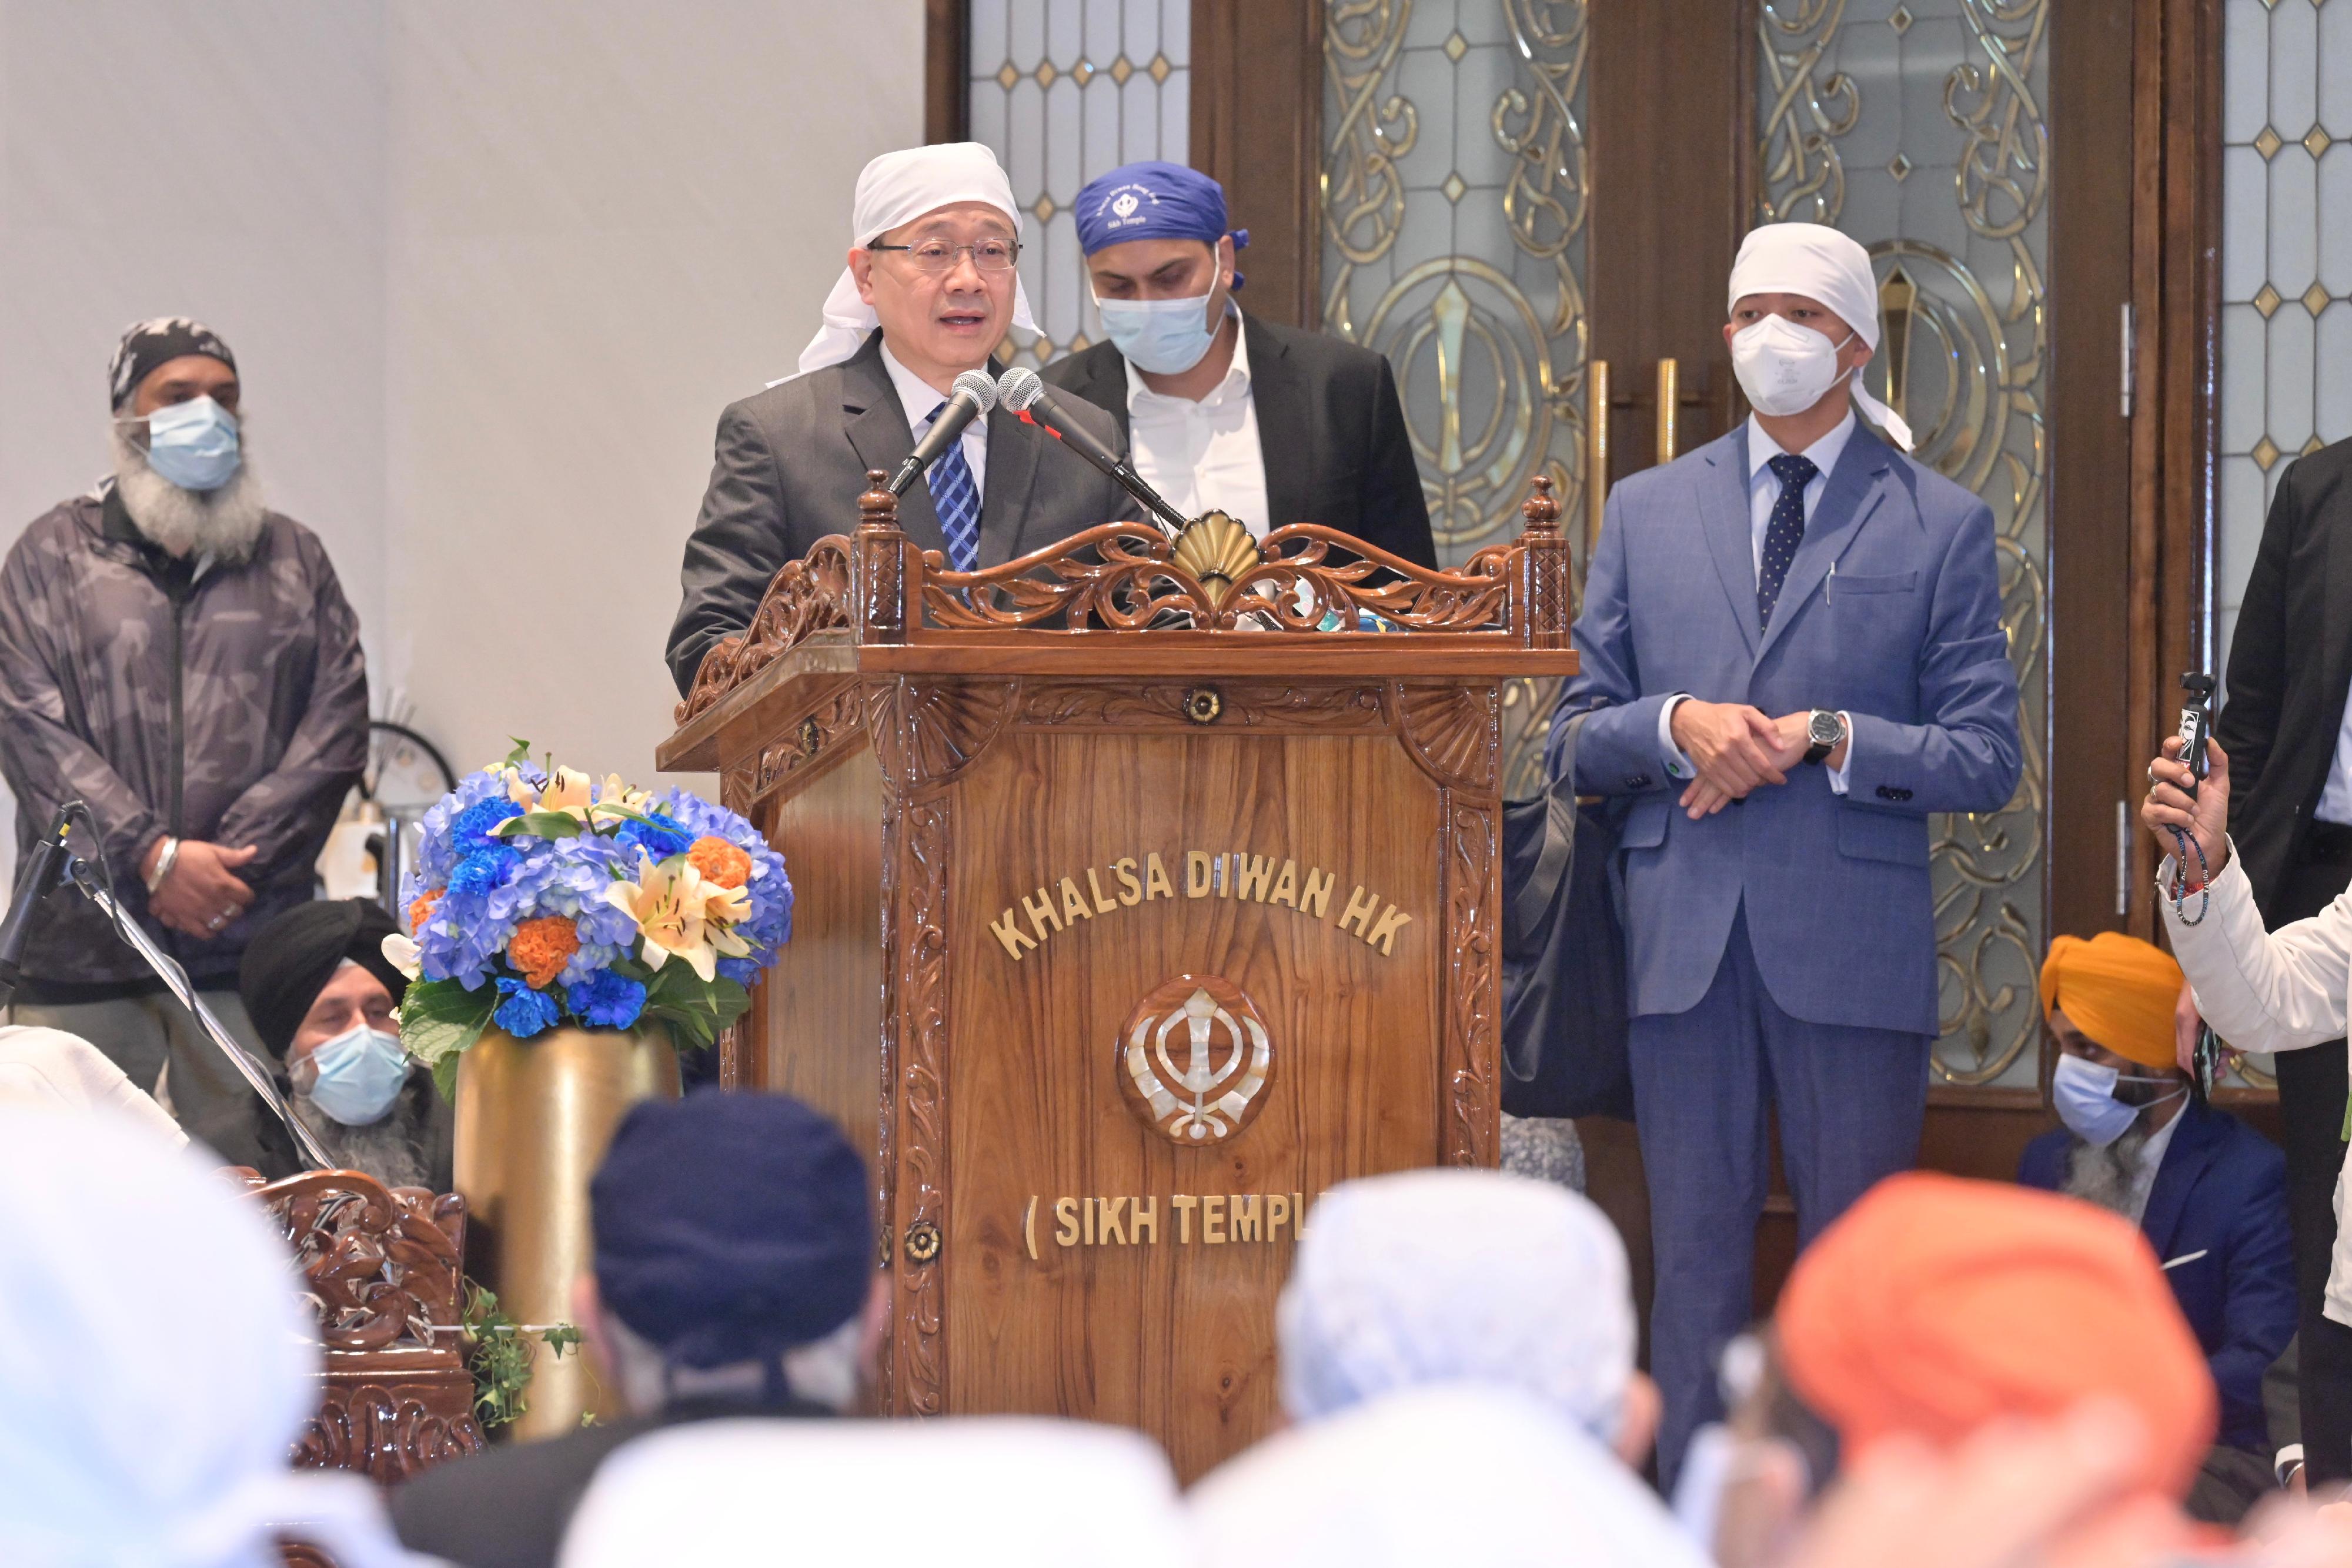 The Chief Executive, Mr John Lee, speaks at the opening ceremony of the new Sikh Temple today (November 8).